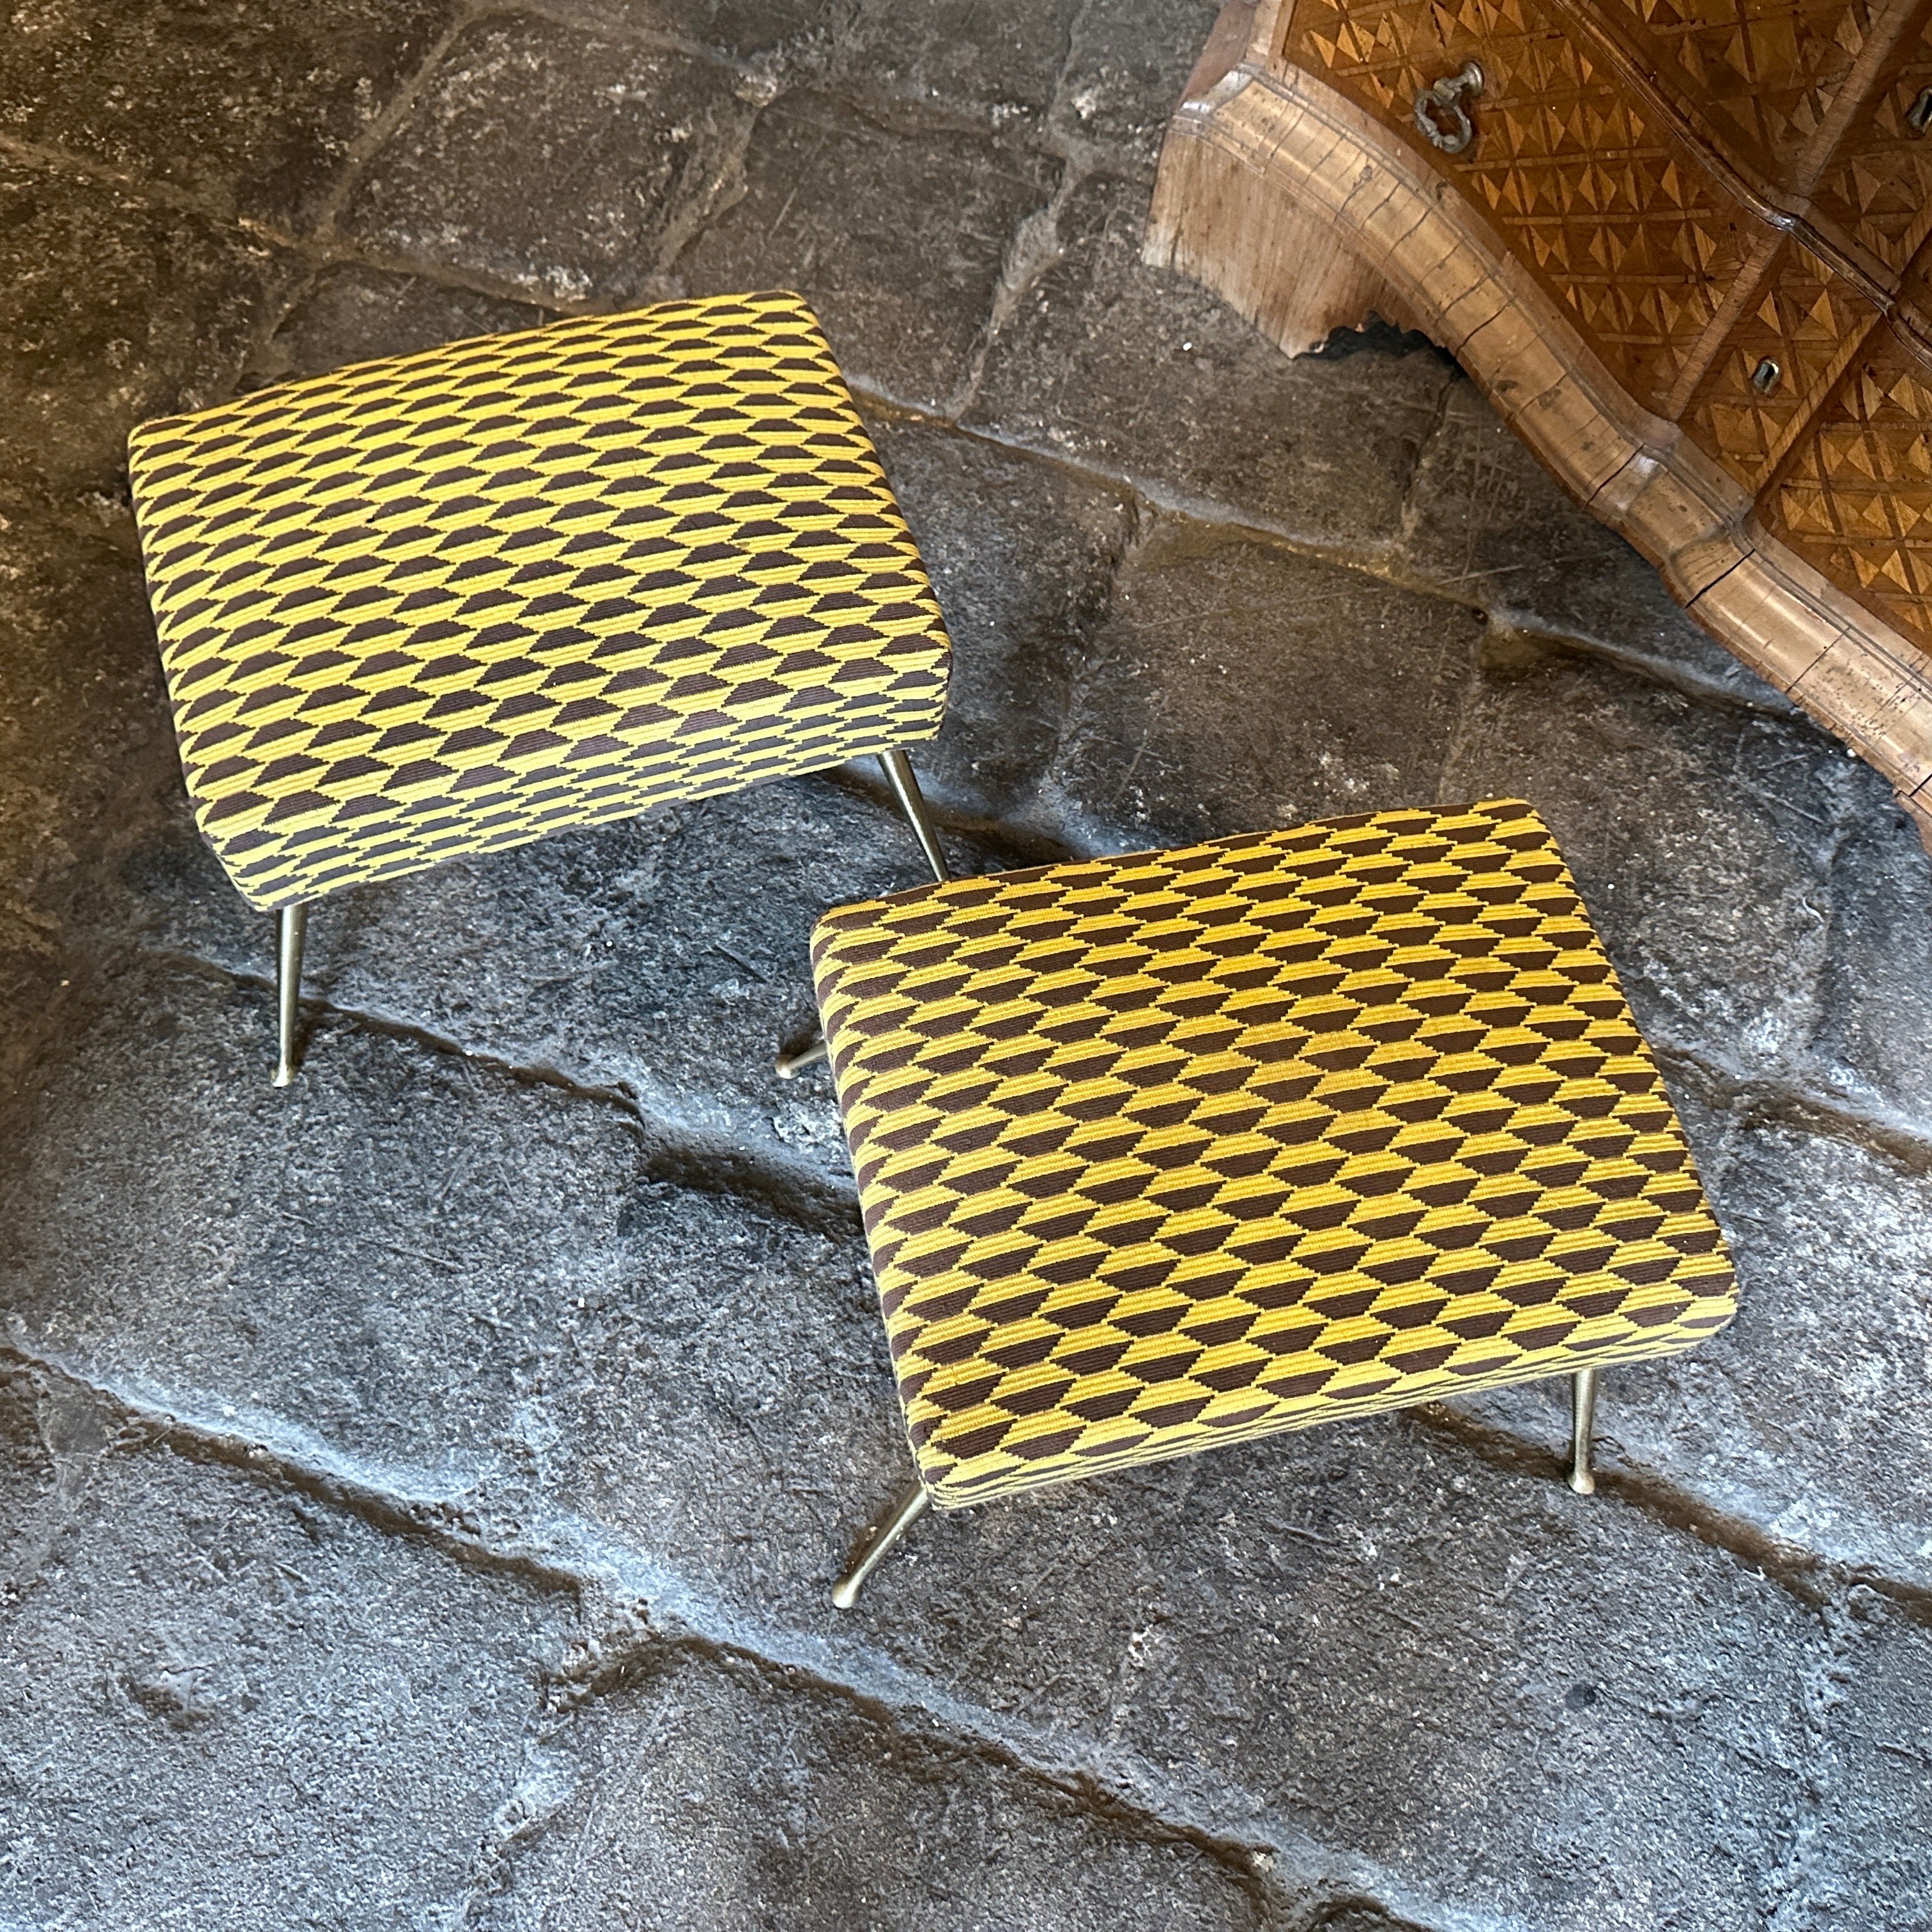 A pair of stools in brass and yellow and brown Dedar fabric, designed and manufactured in Italy in the Fifties, are in original patina and condition. These stools are both functional and stylish additions to any interior space, embodying the